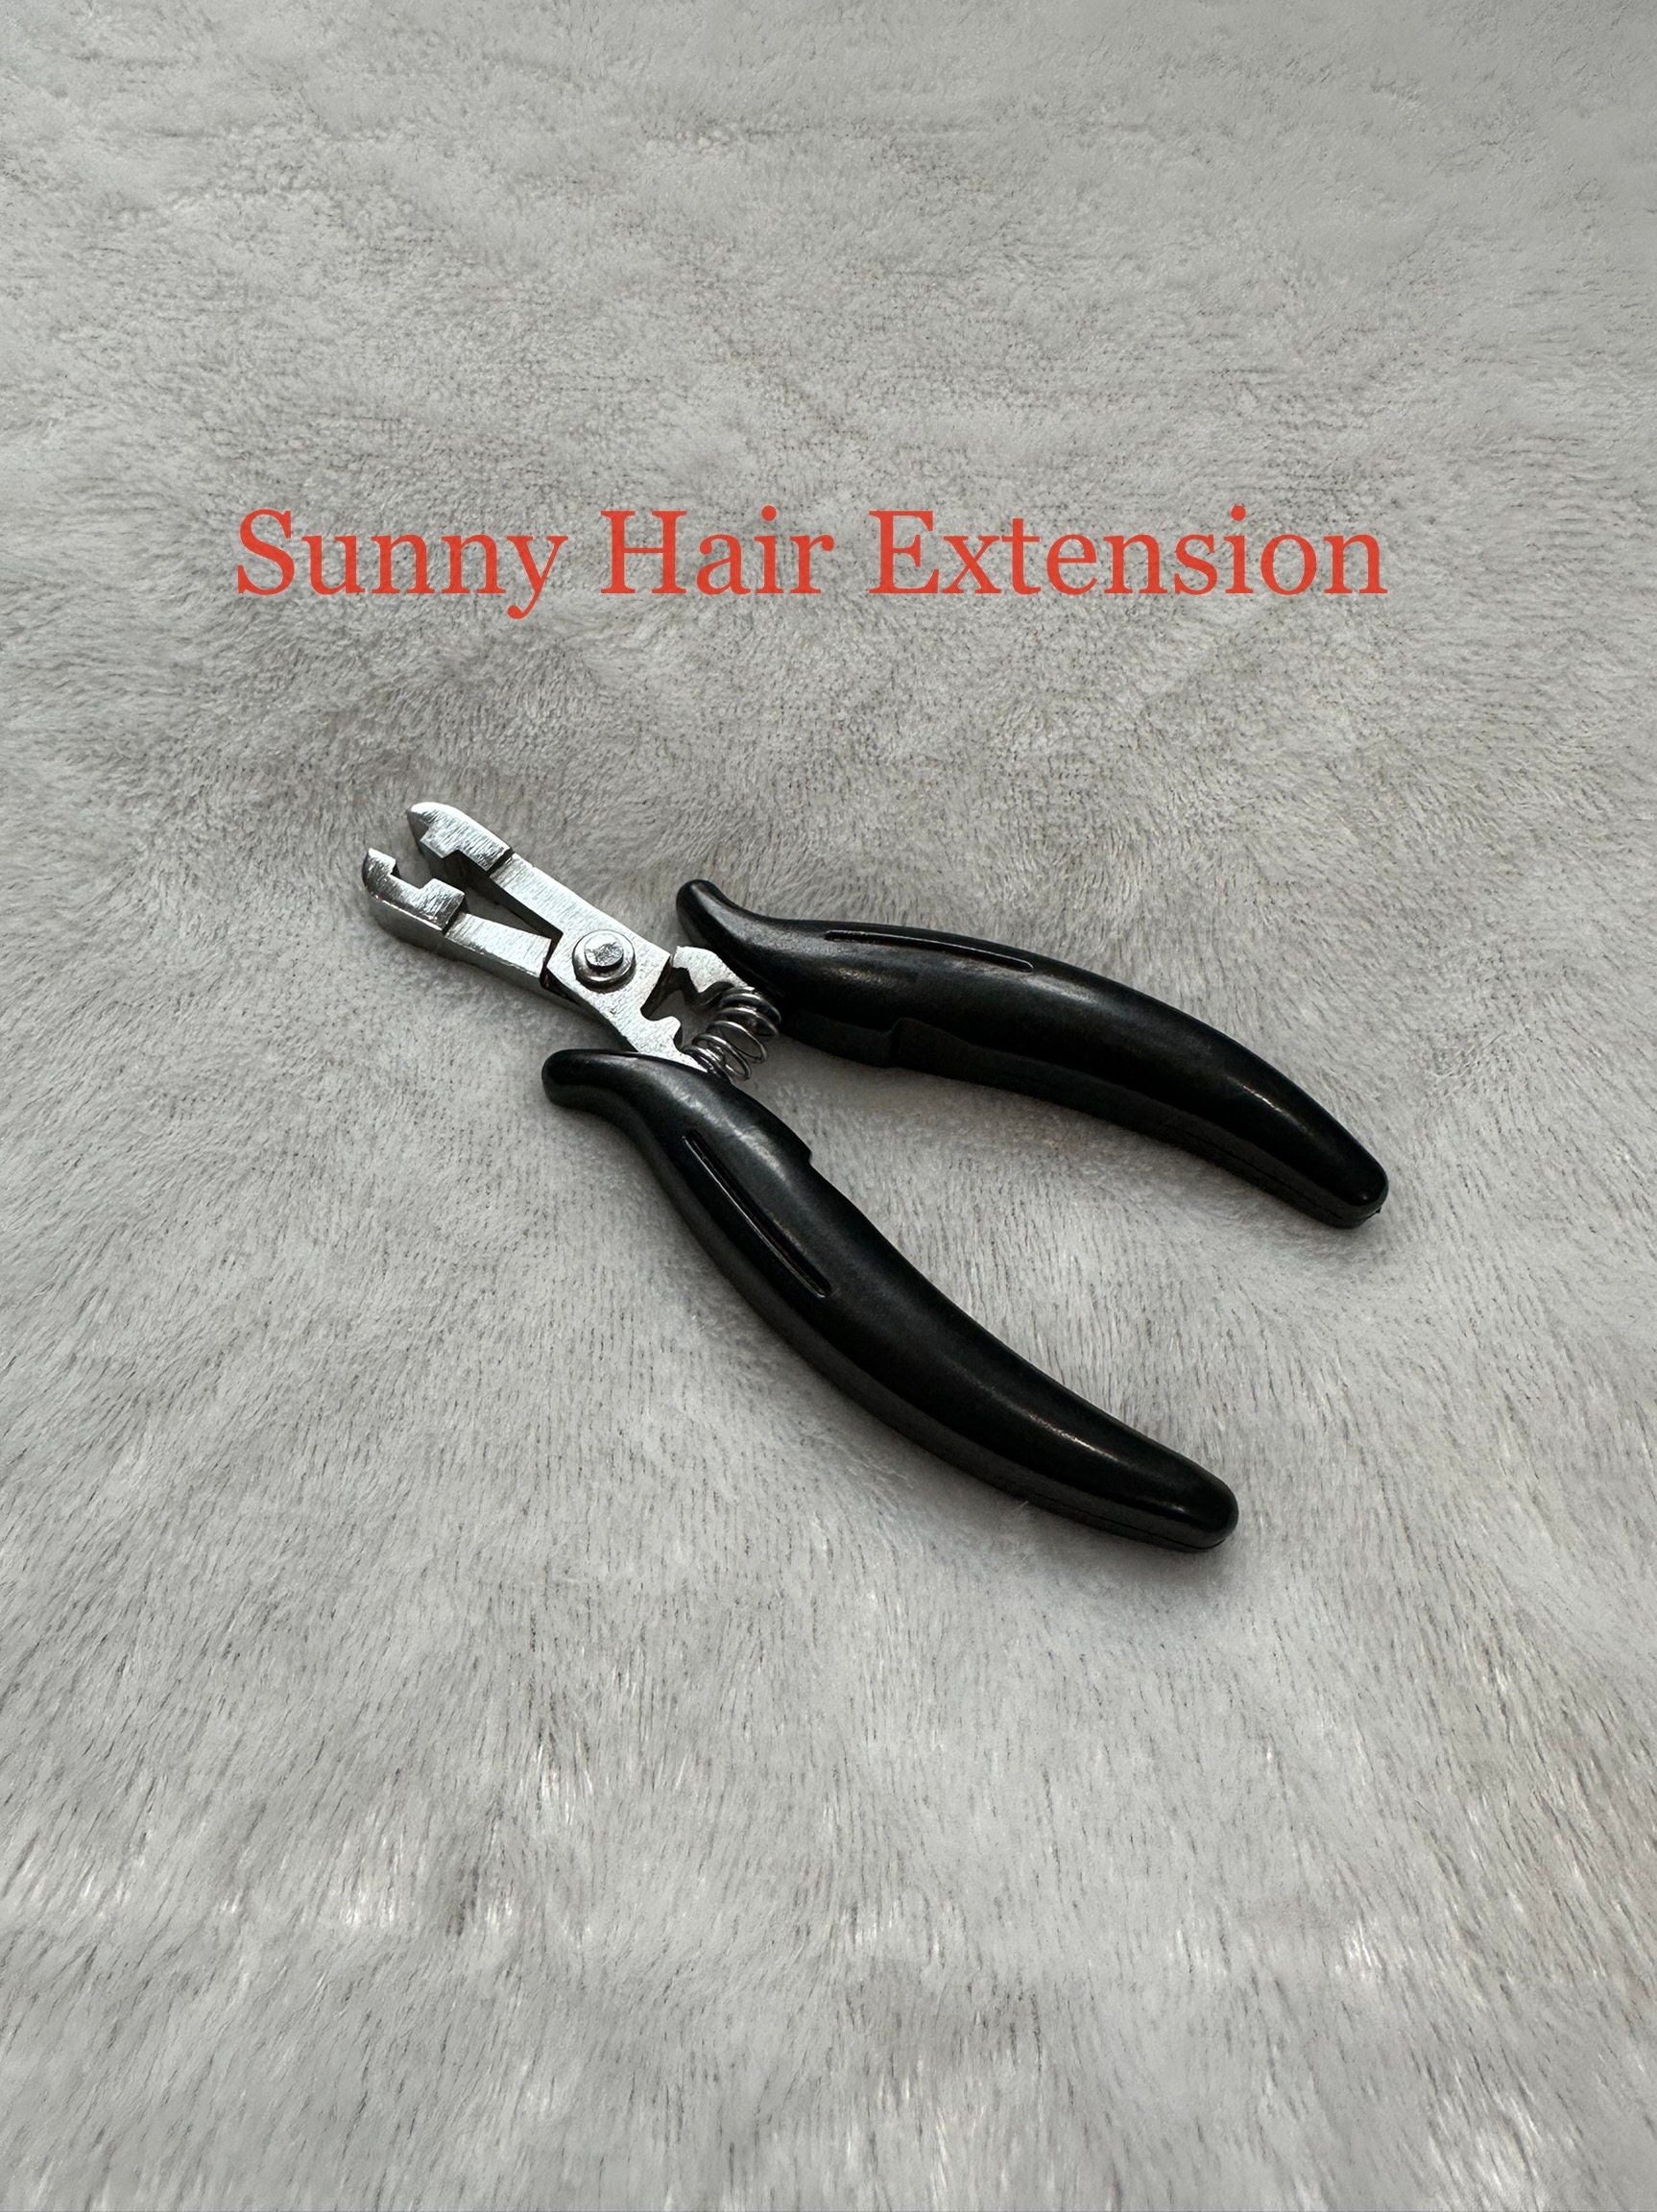 Hair Extension Tool Kit, Bead Device Tool, Silicone Lined Links Beads,  Curved Hair Plier, for Tinsel and Feather Hair Extensions or Removal (Black)